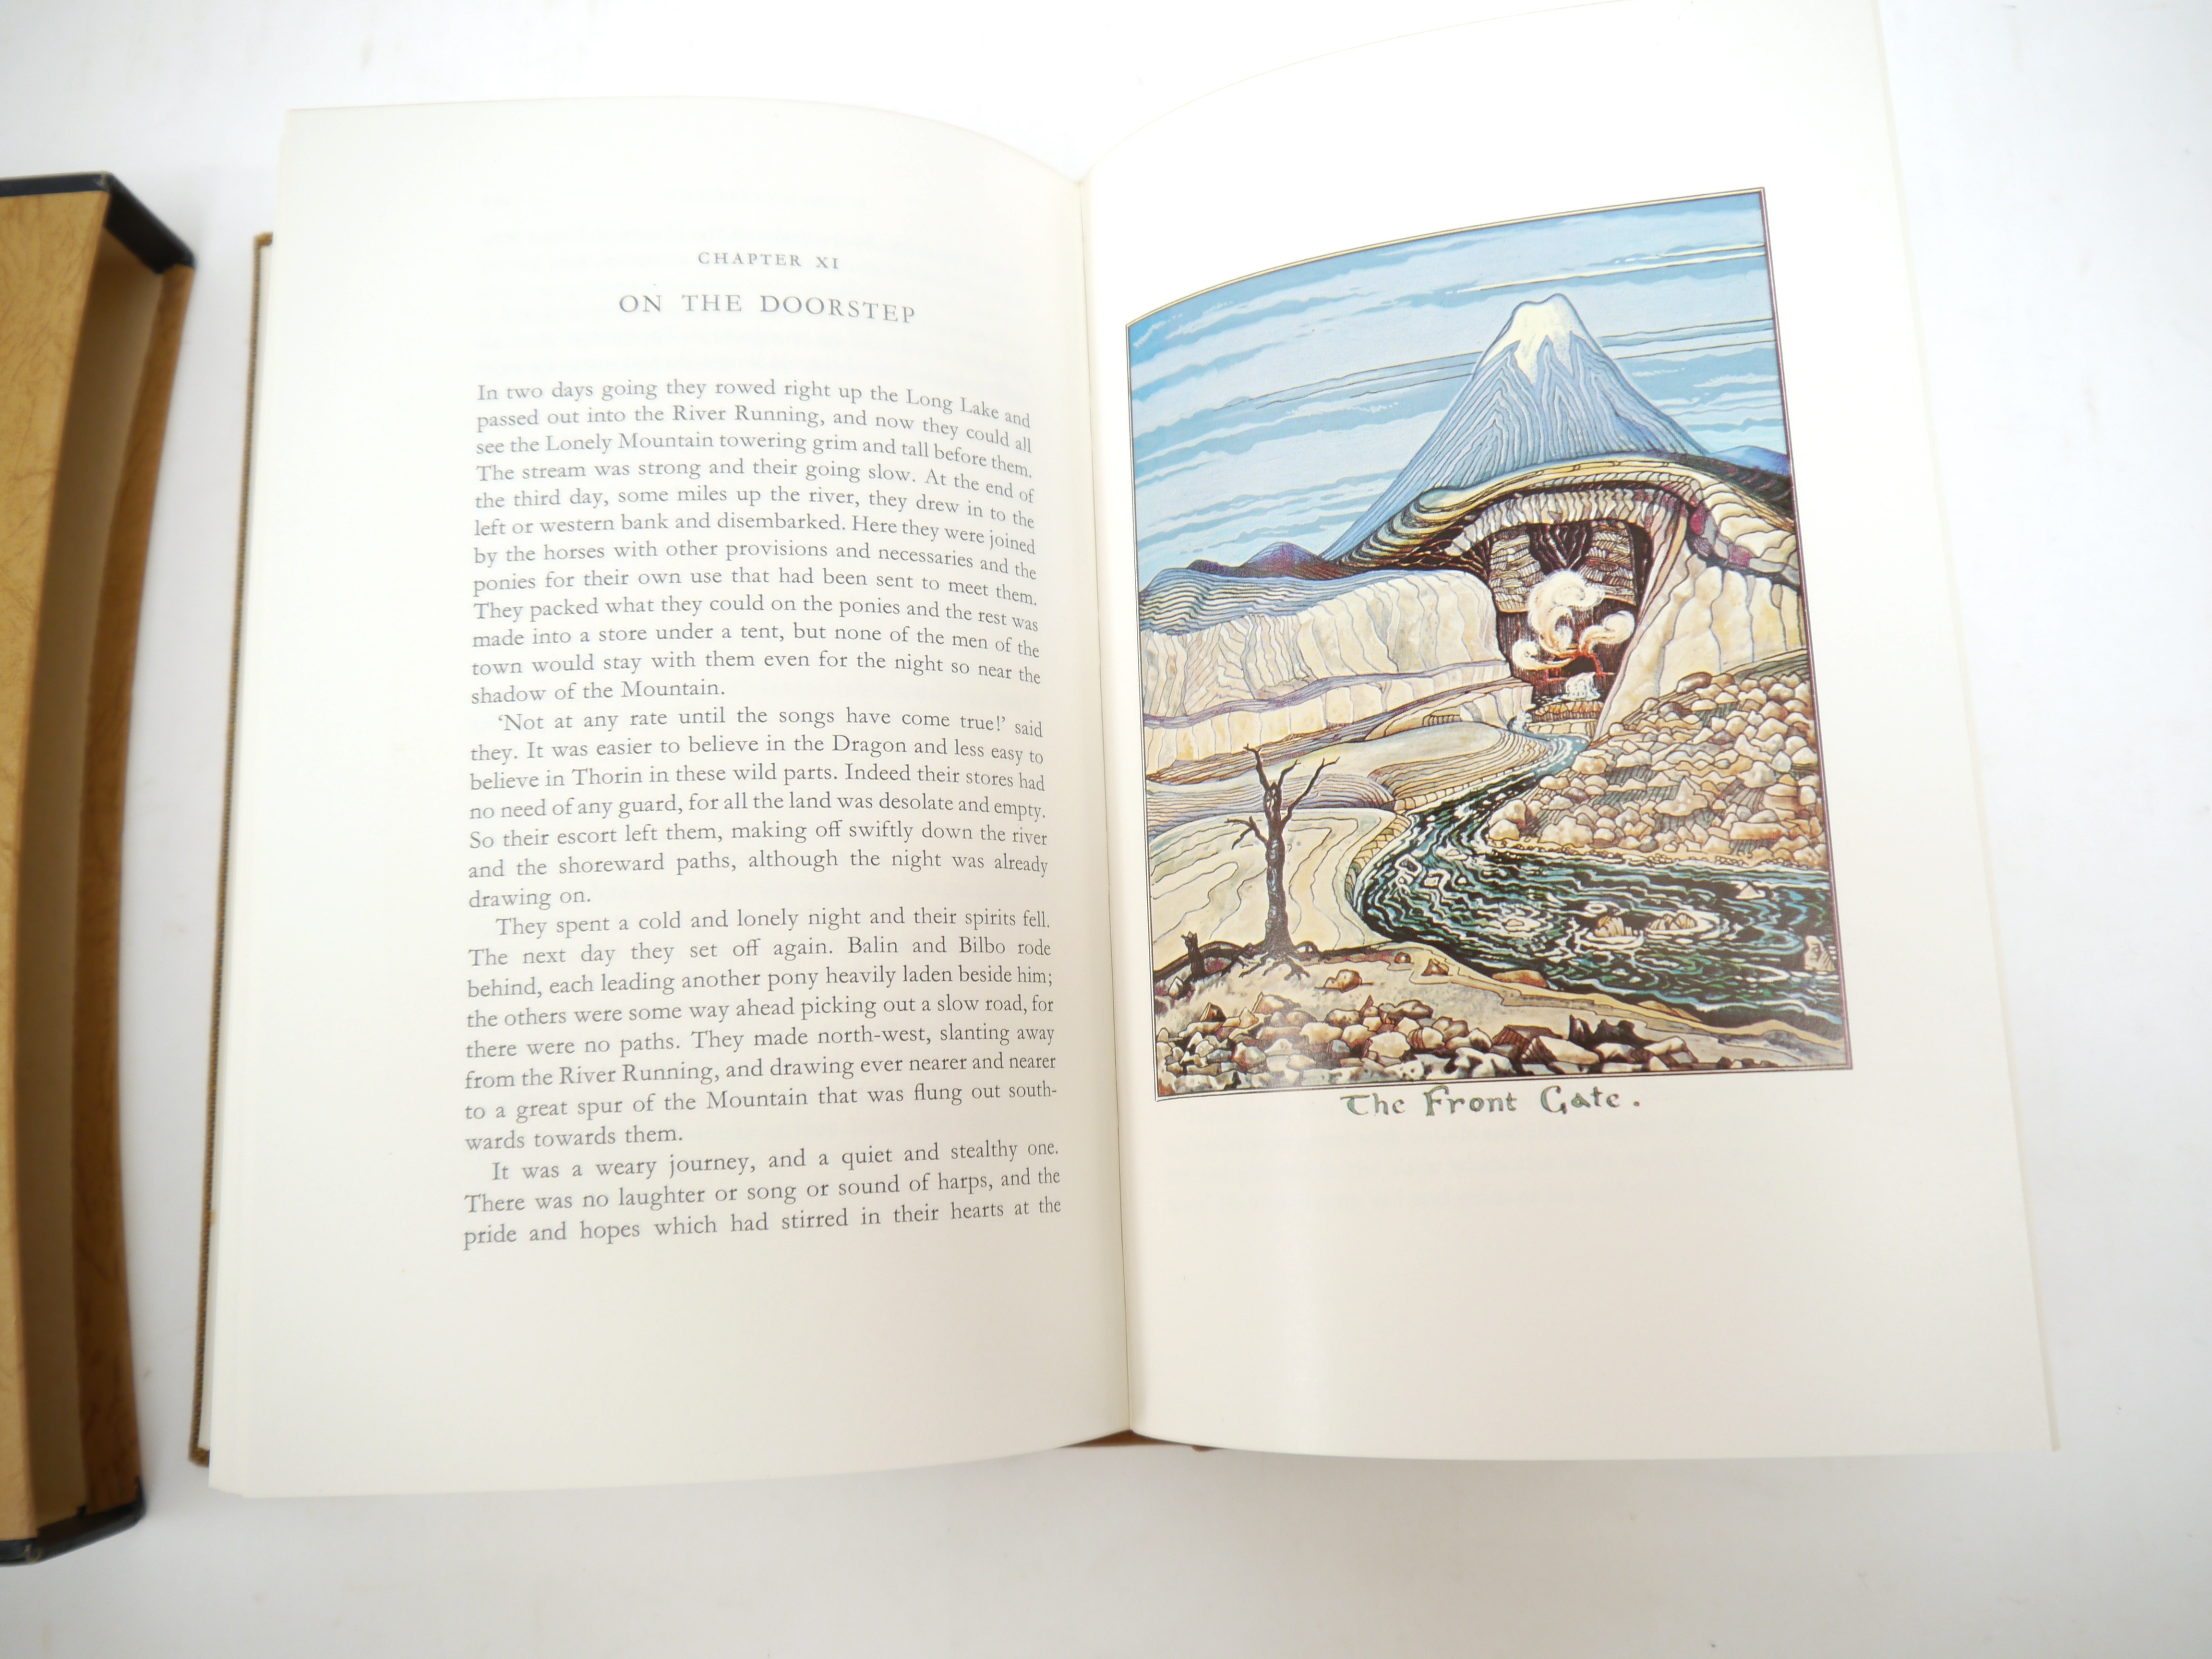 J.R.R. Tolkien: 'The Hobbit, or There and Back Again', London, George Allen & Unwin Ltd. for the - Image 5 of 6